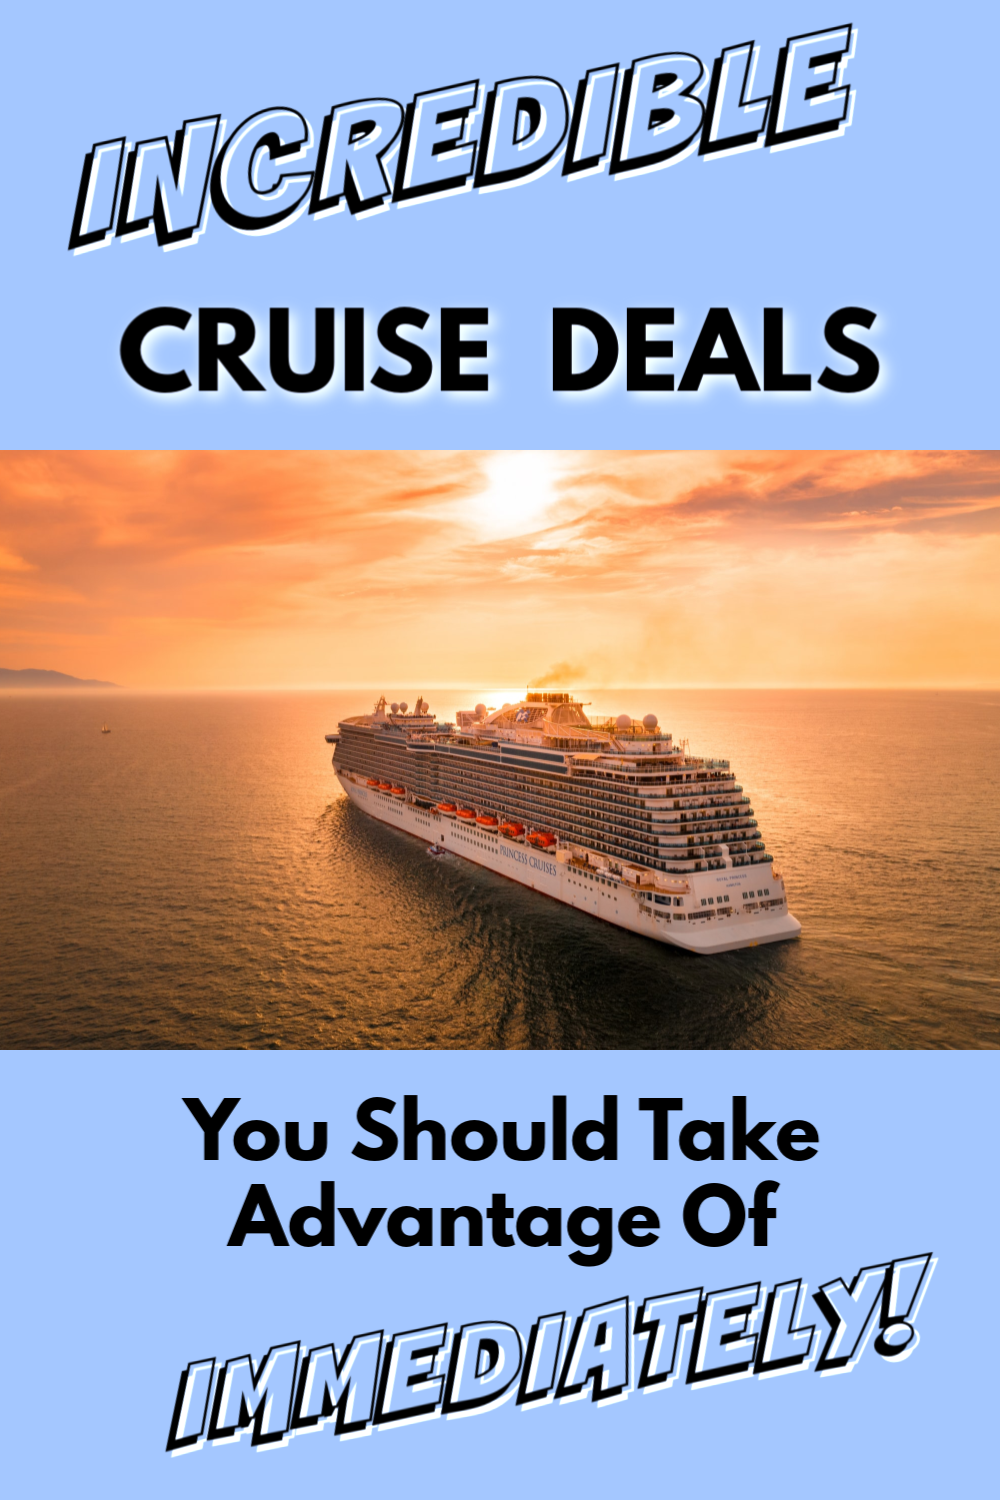 Incredible cruise deals, cruise discounts, and last minute ...